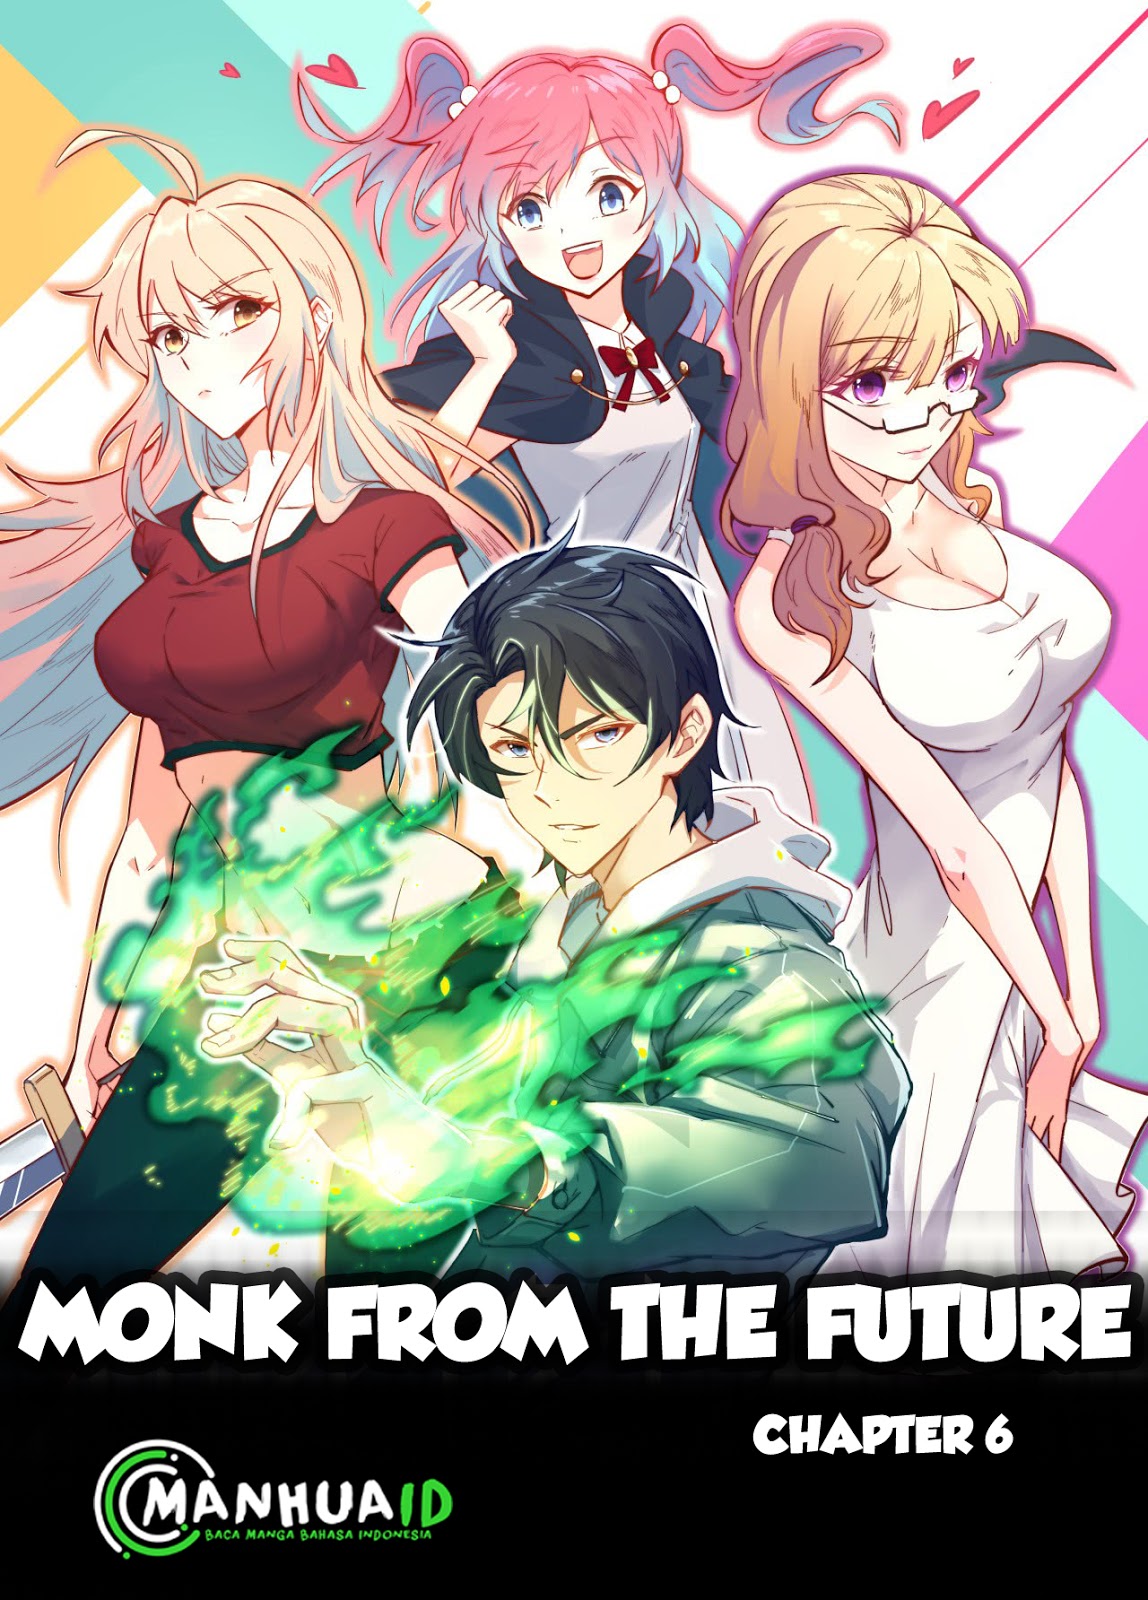 Monk From the Future Chapter 6